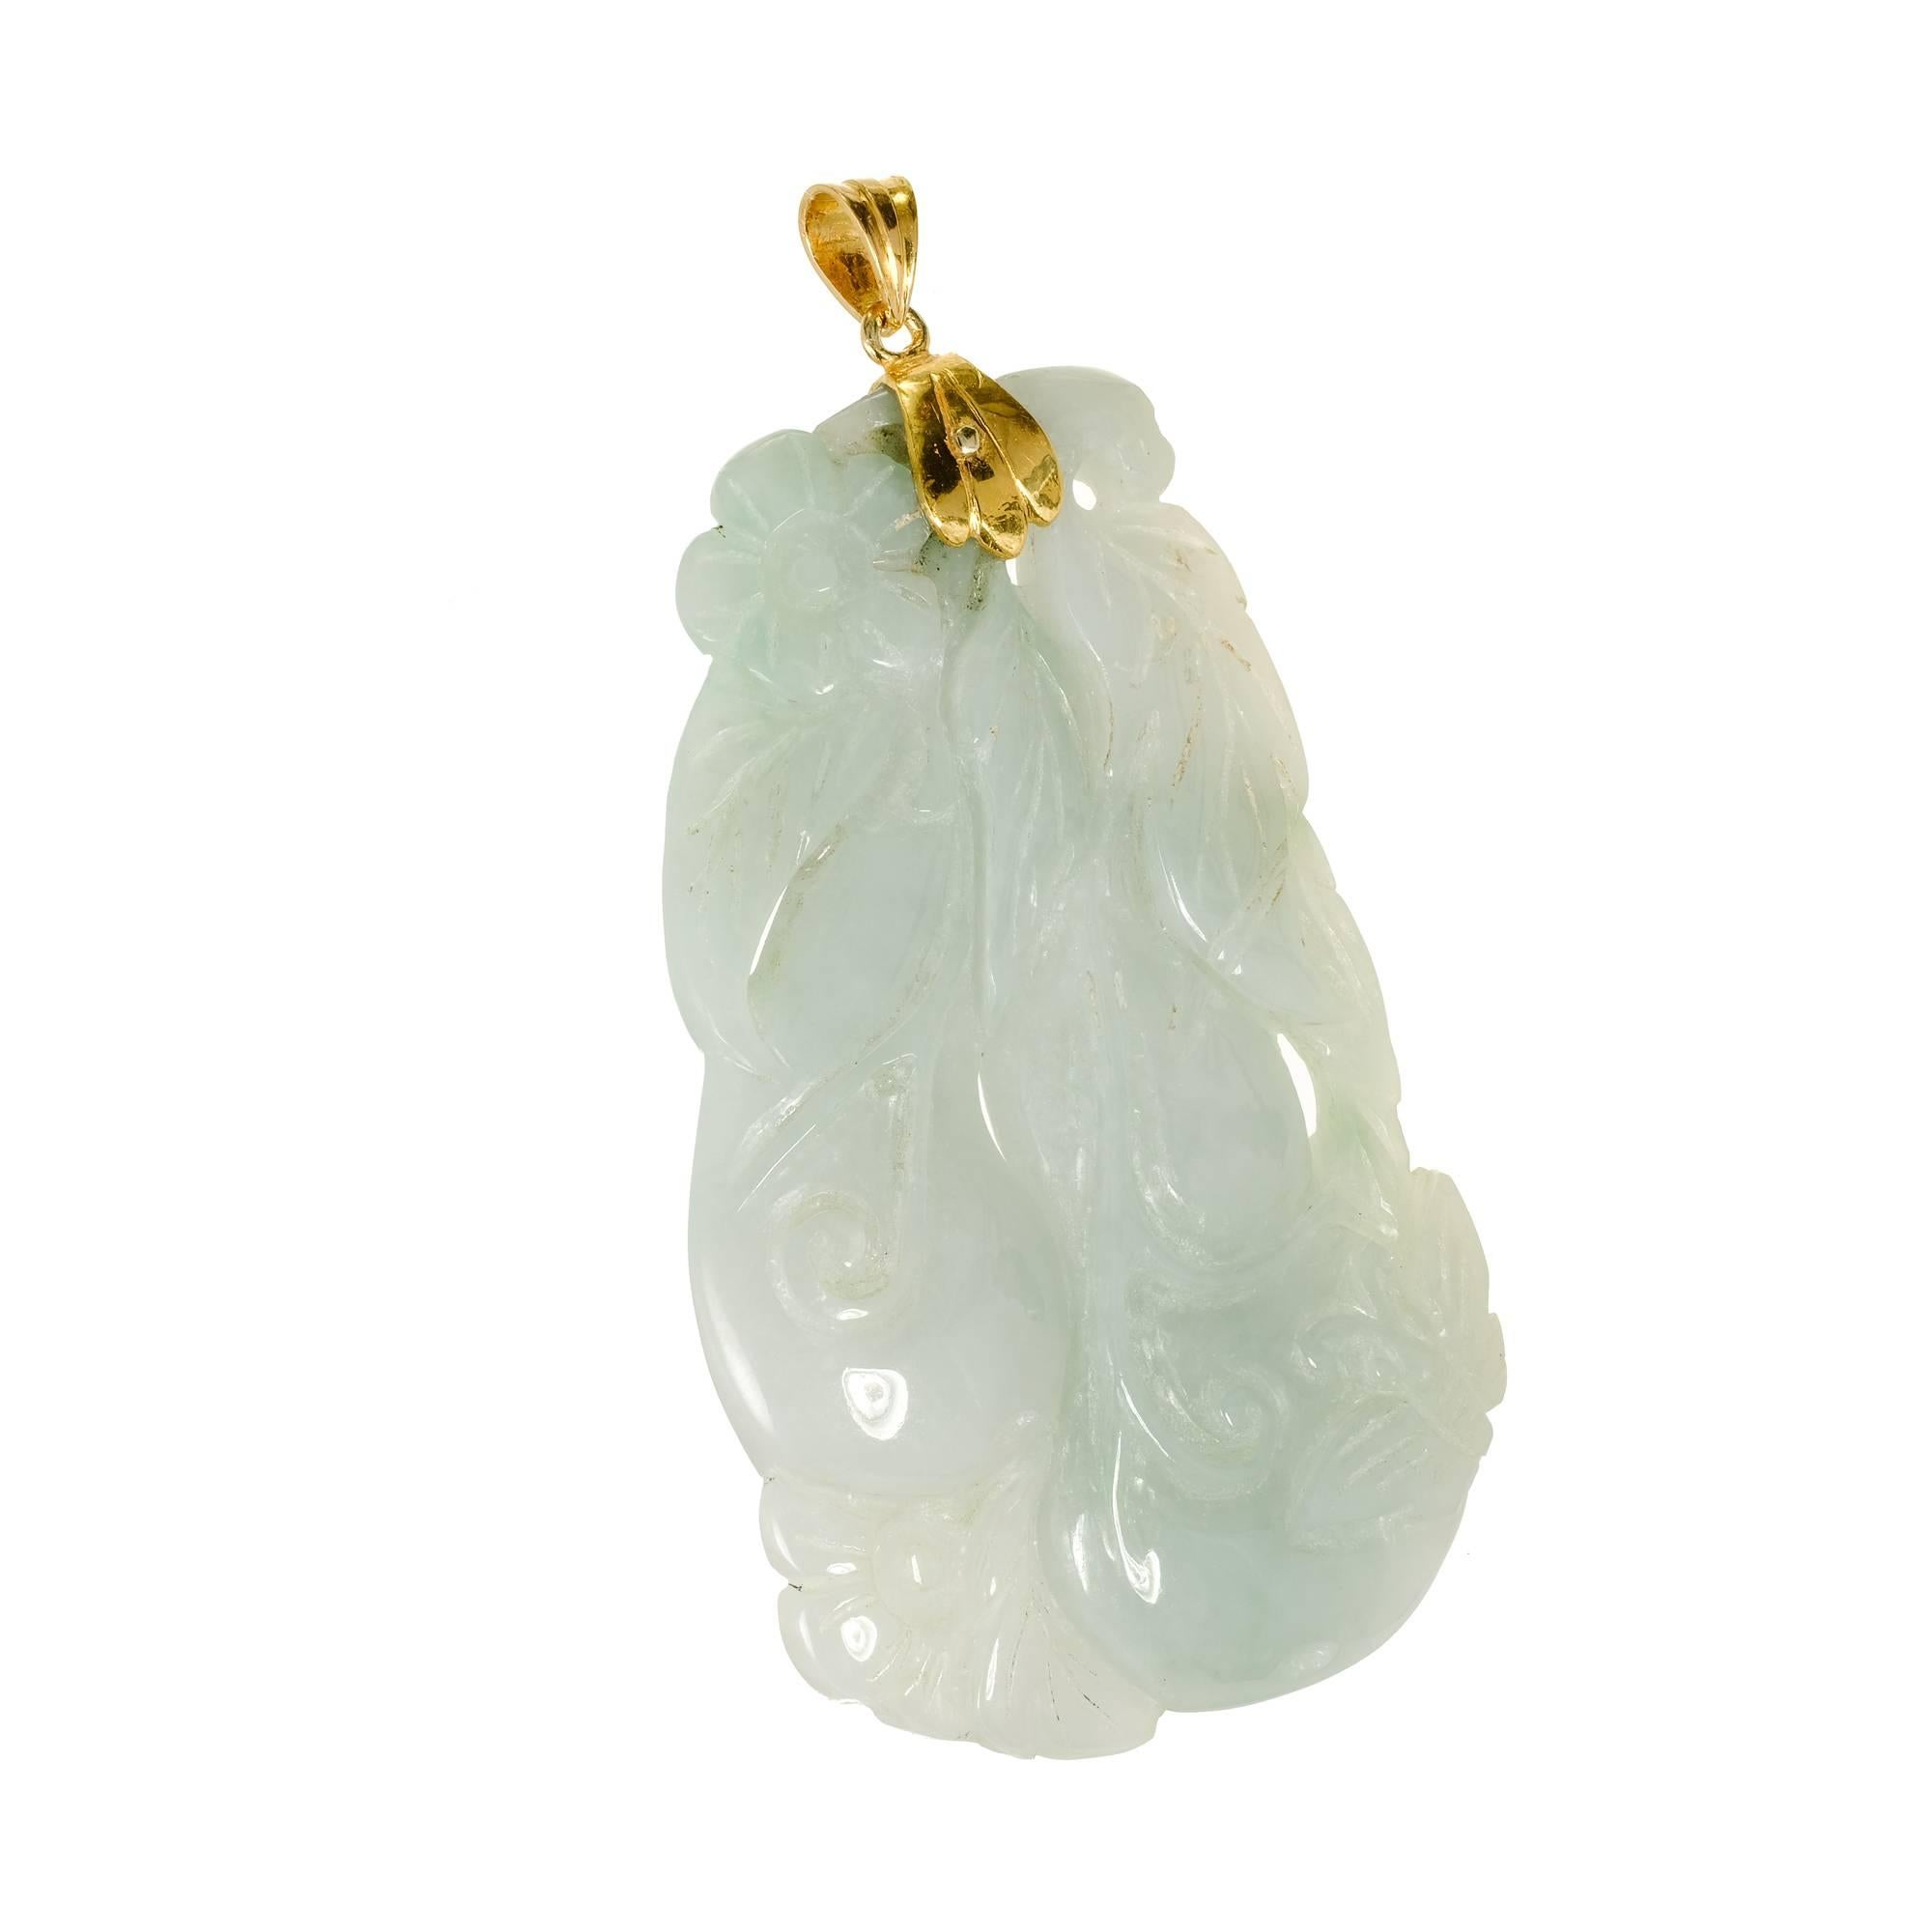 Large translucent Jadeite Jade carved pendant with a 22k gold cap and bail. Mottled light green GIA certified natural.

1 pierced carved mottled light green Jadeite Jade, 68.31 x 45.47 x 8.06mm, GIA certificate #5181636087
14k yellow gold
43.96